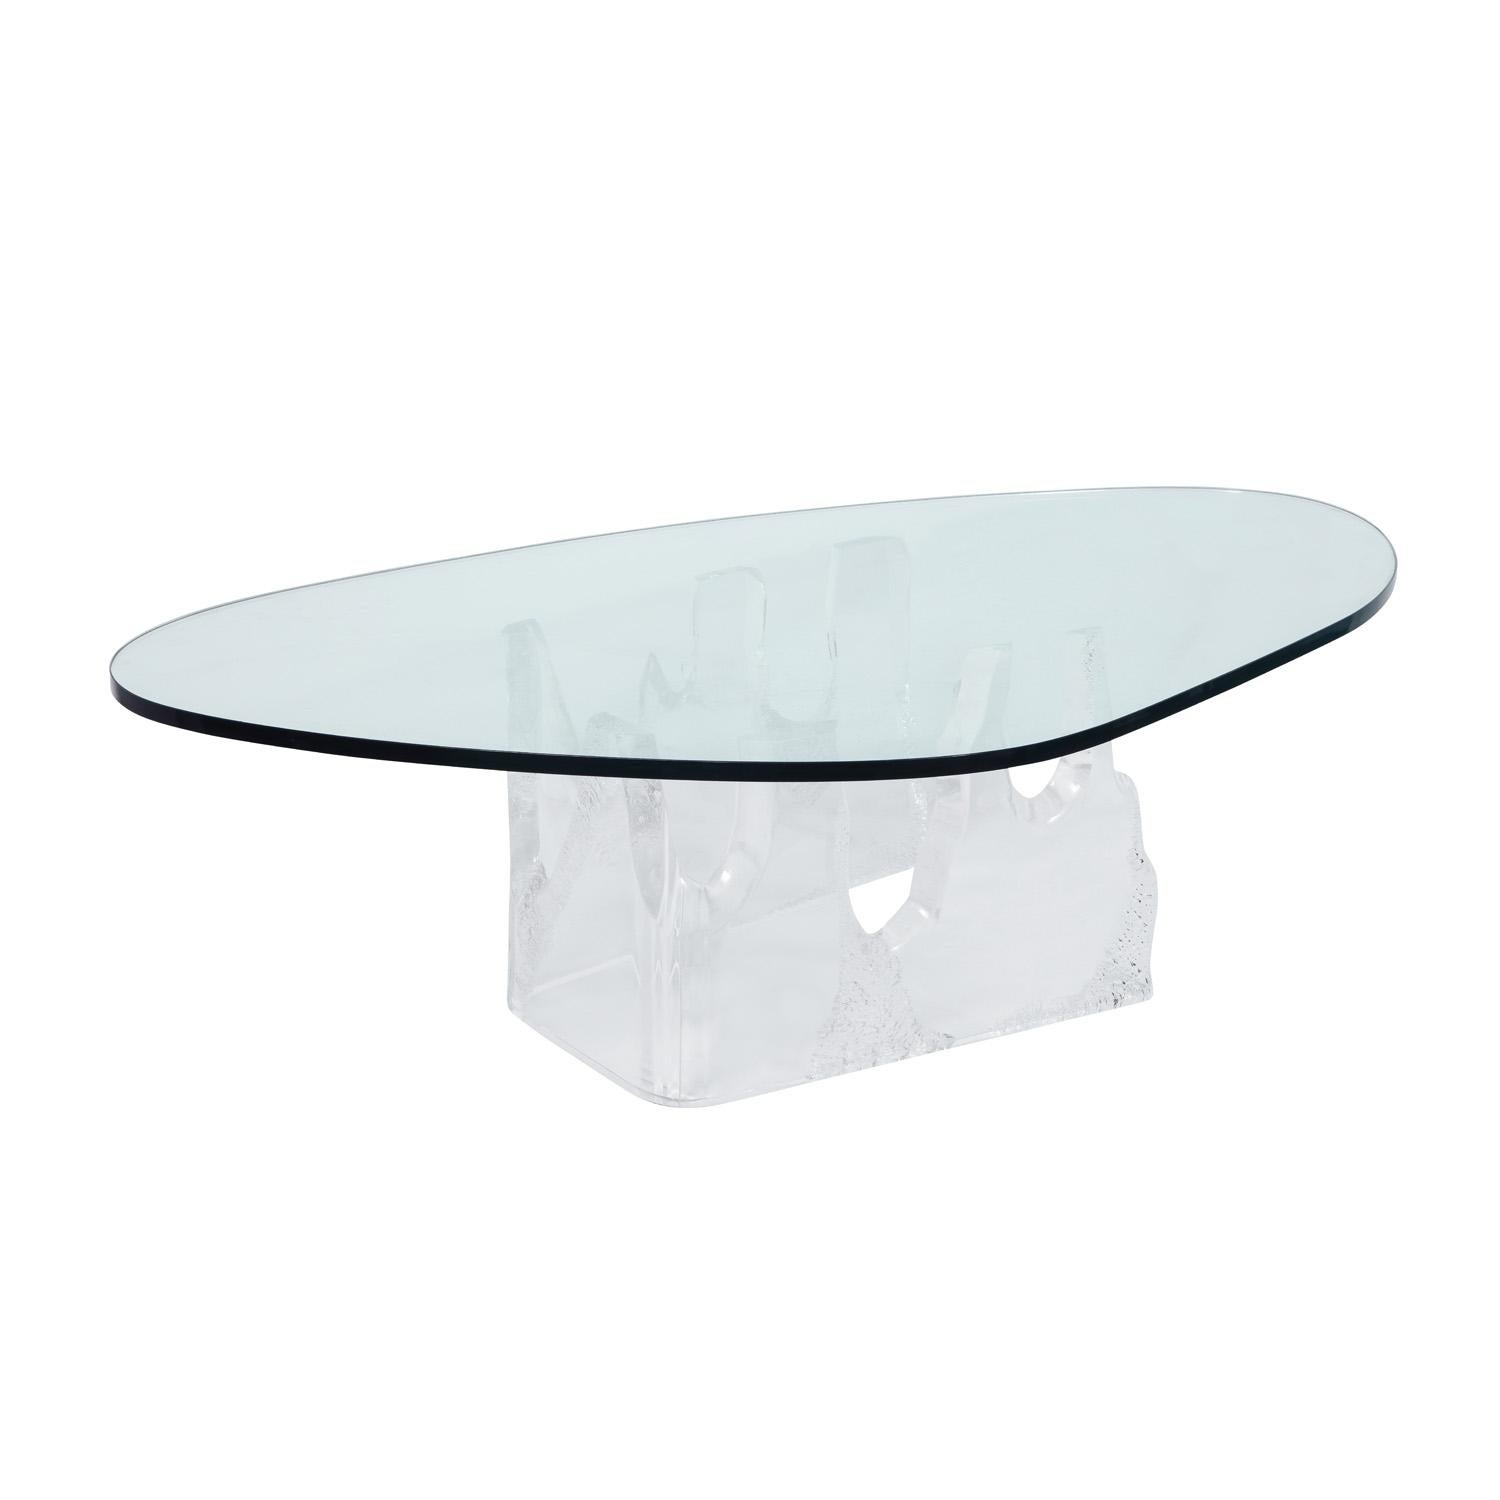 Pair of large free form coffee tables with stalagmite lucite bases and thick glass tops attributed to Lion in Frost, American 1970's. These tables are different heights so one can cantilever over the other if desired. They are a big scale and would